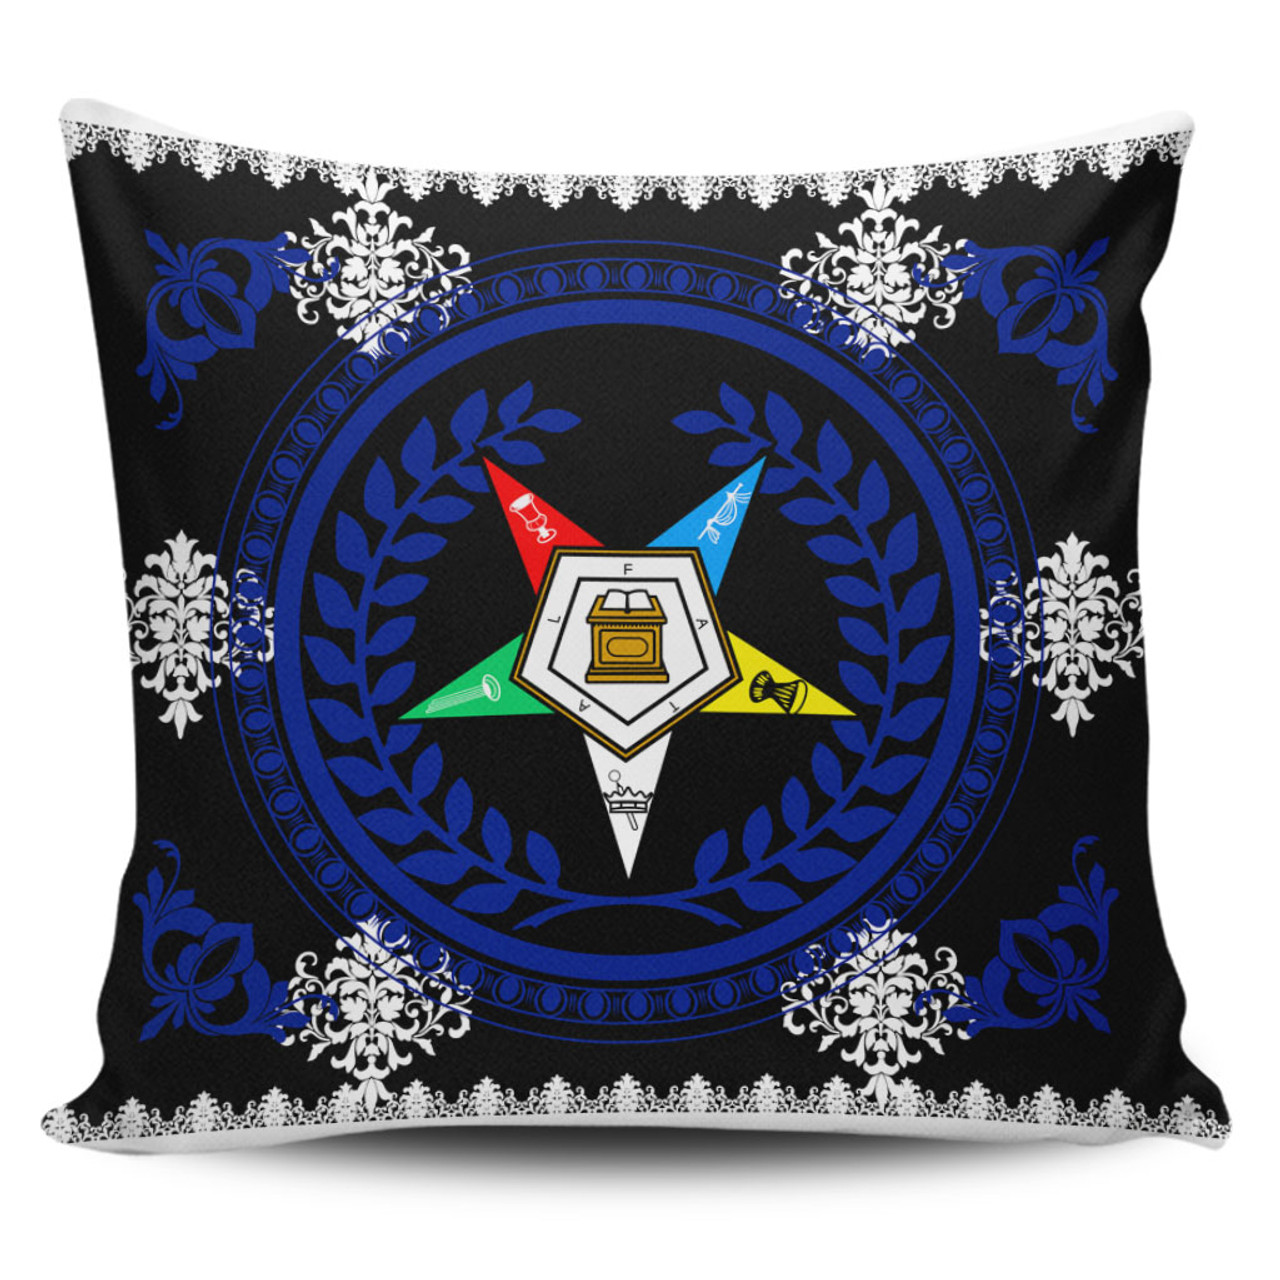 Order of the Eastern Star Pillow Cover Floral Circle